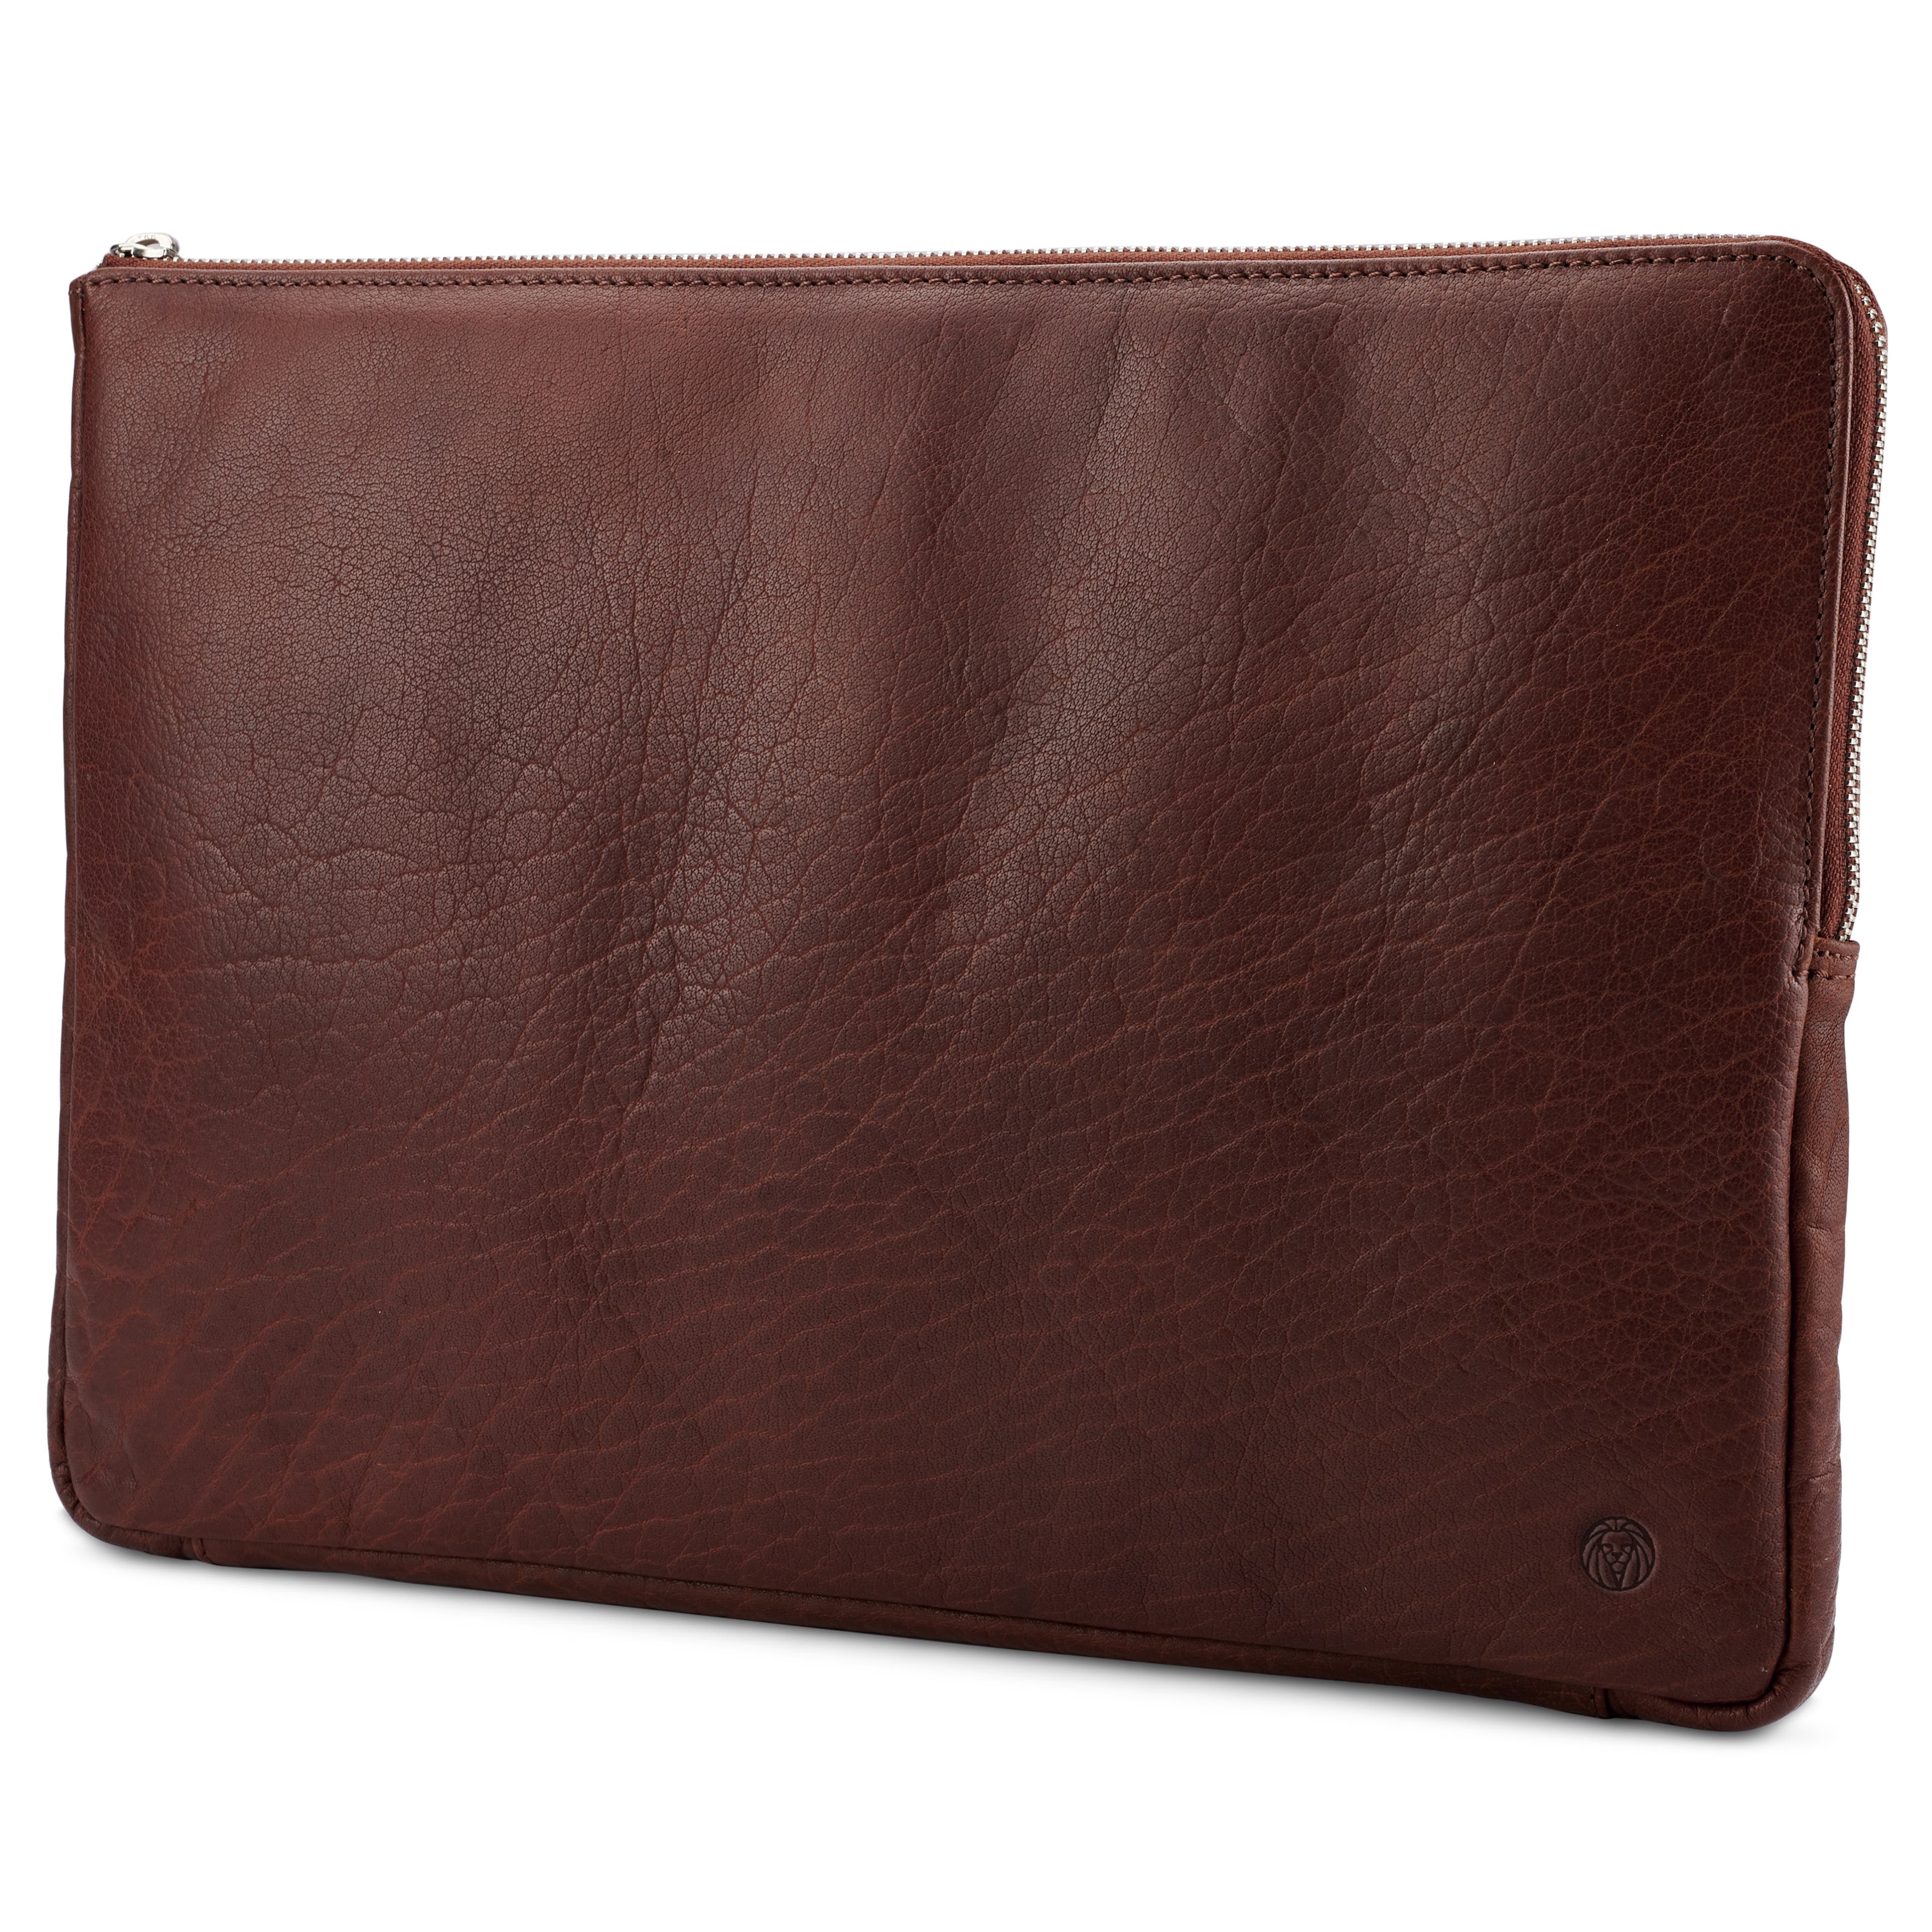 Montreal Tan Leather Small Laptop Sleeve